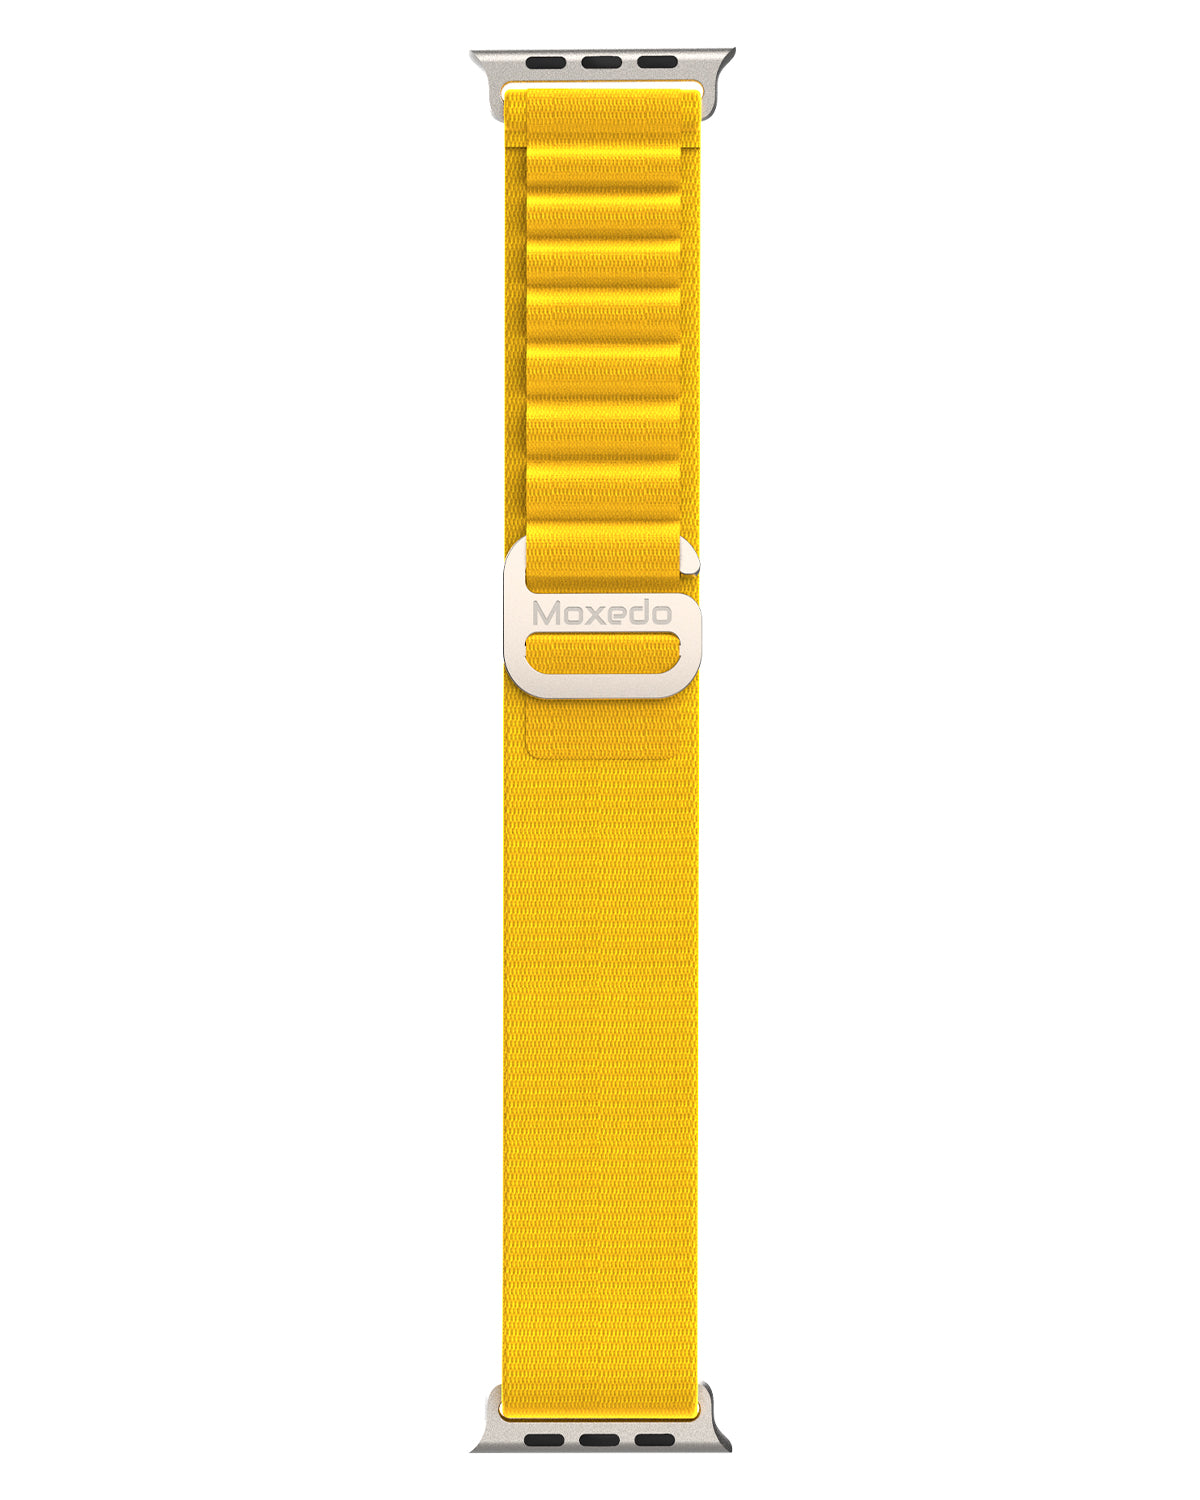 Moxedo Alpine Loop Watch Band Adjustable Sports Nylon Woven with Titanium G-Hook Strap design for 44mm,45mm,49mm (Yellow)